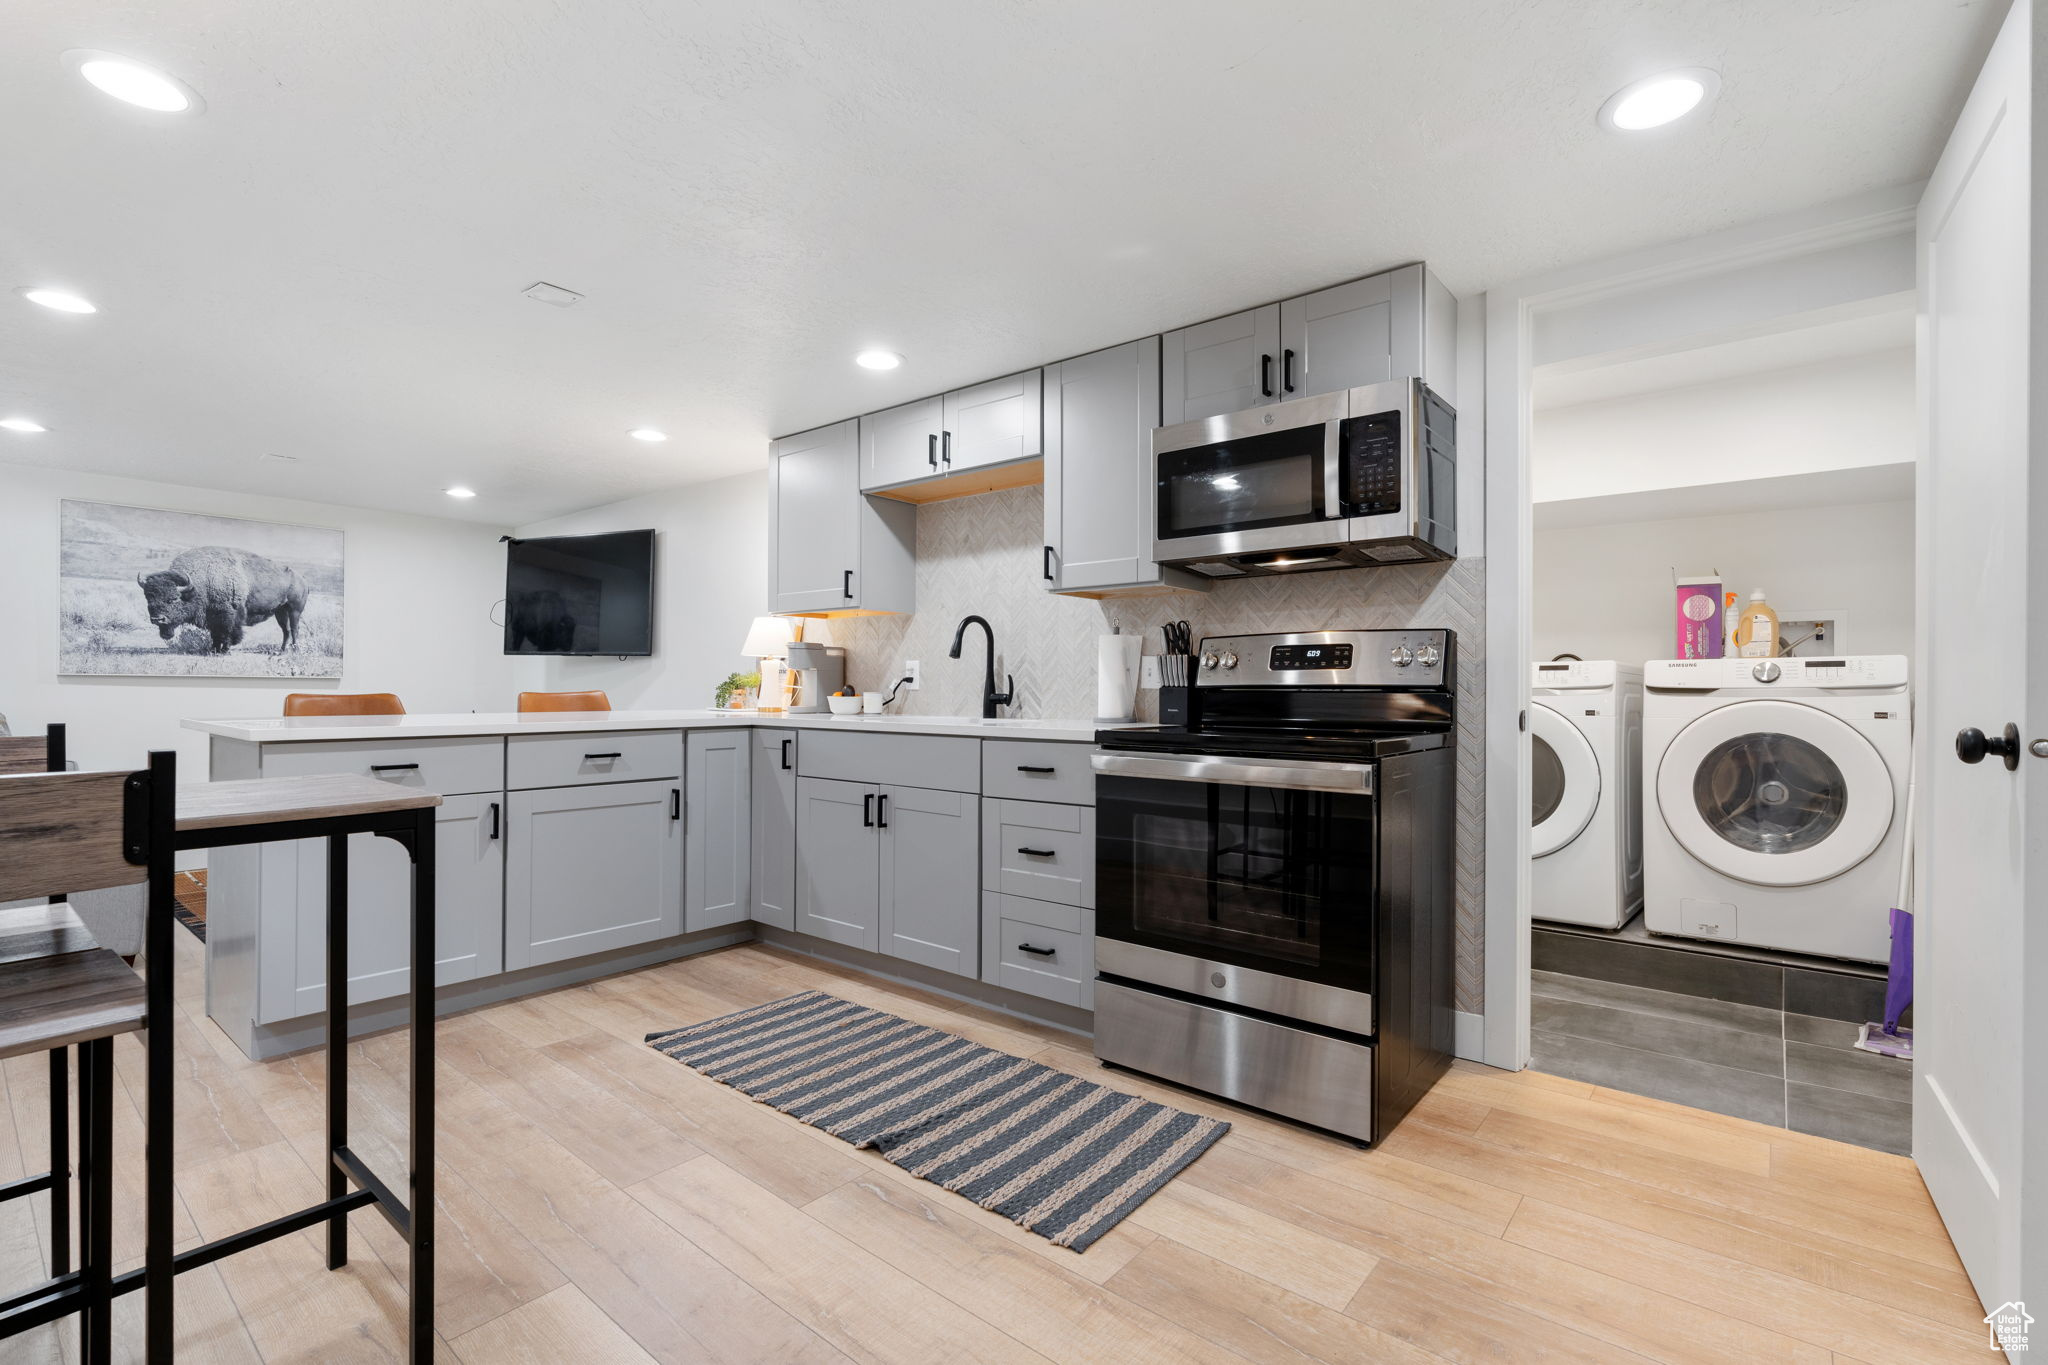 Kitchen featuring appliances with stainless steel finishes, washer and dryer, light hardwood / wood-style floors, tasteful backsplash, and gray cabinets